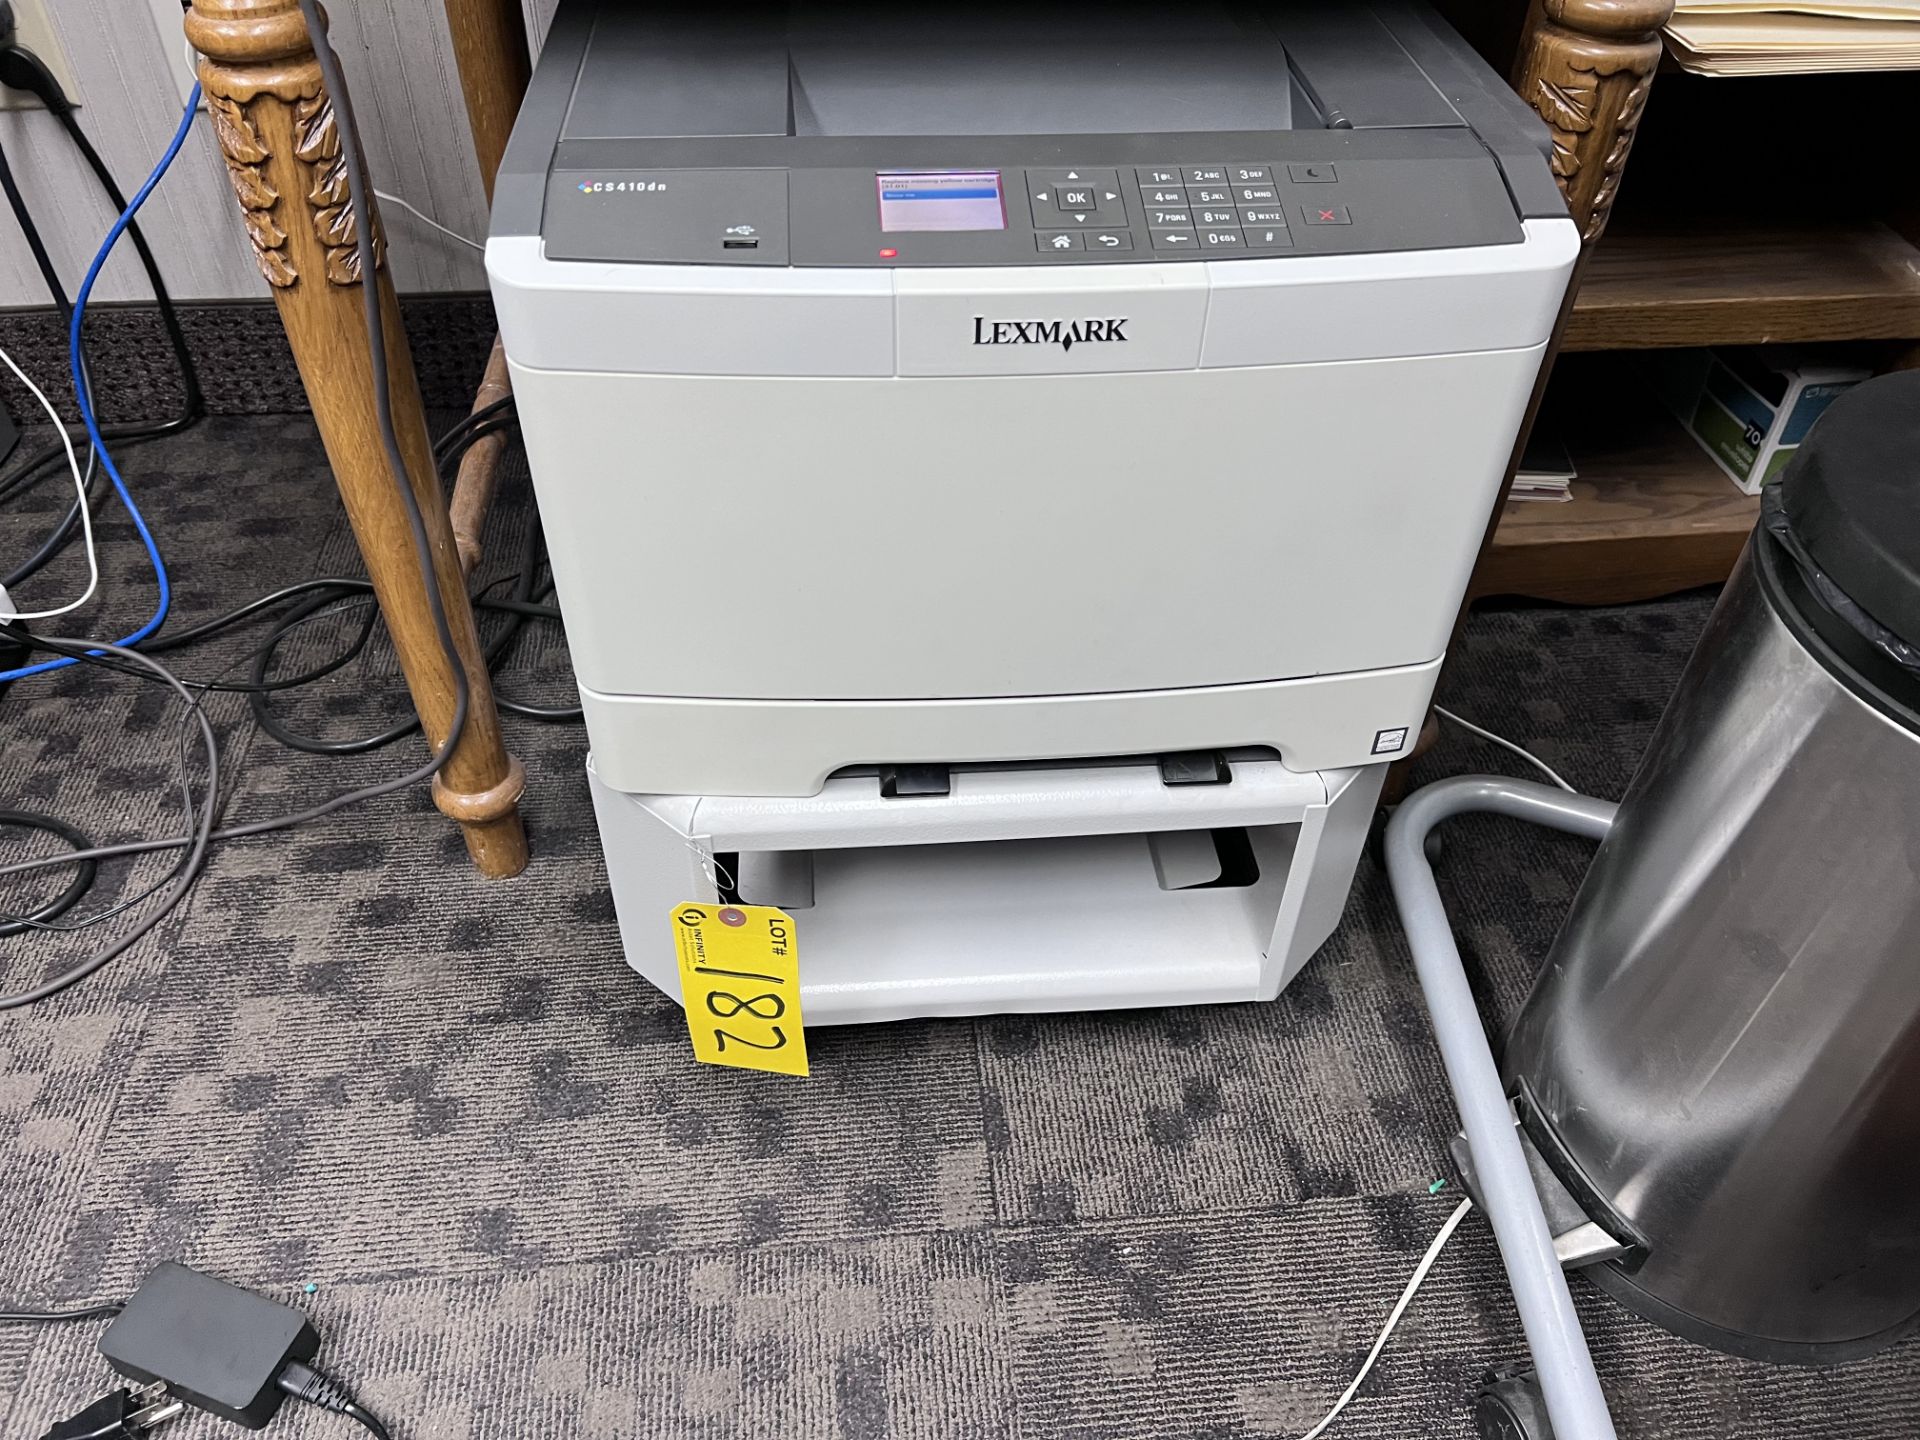 SUPER G3 FOX, TABLE, CHAIR, LEXMARK 182 LASER PRINTER, STAND - Image 2 of 2